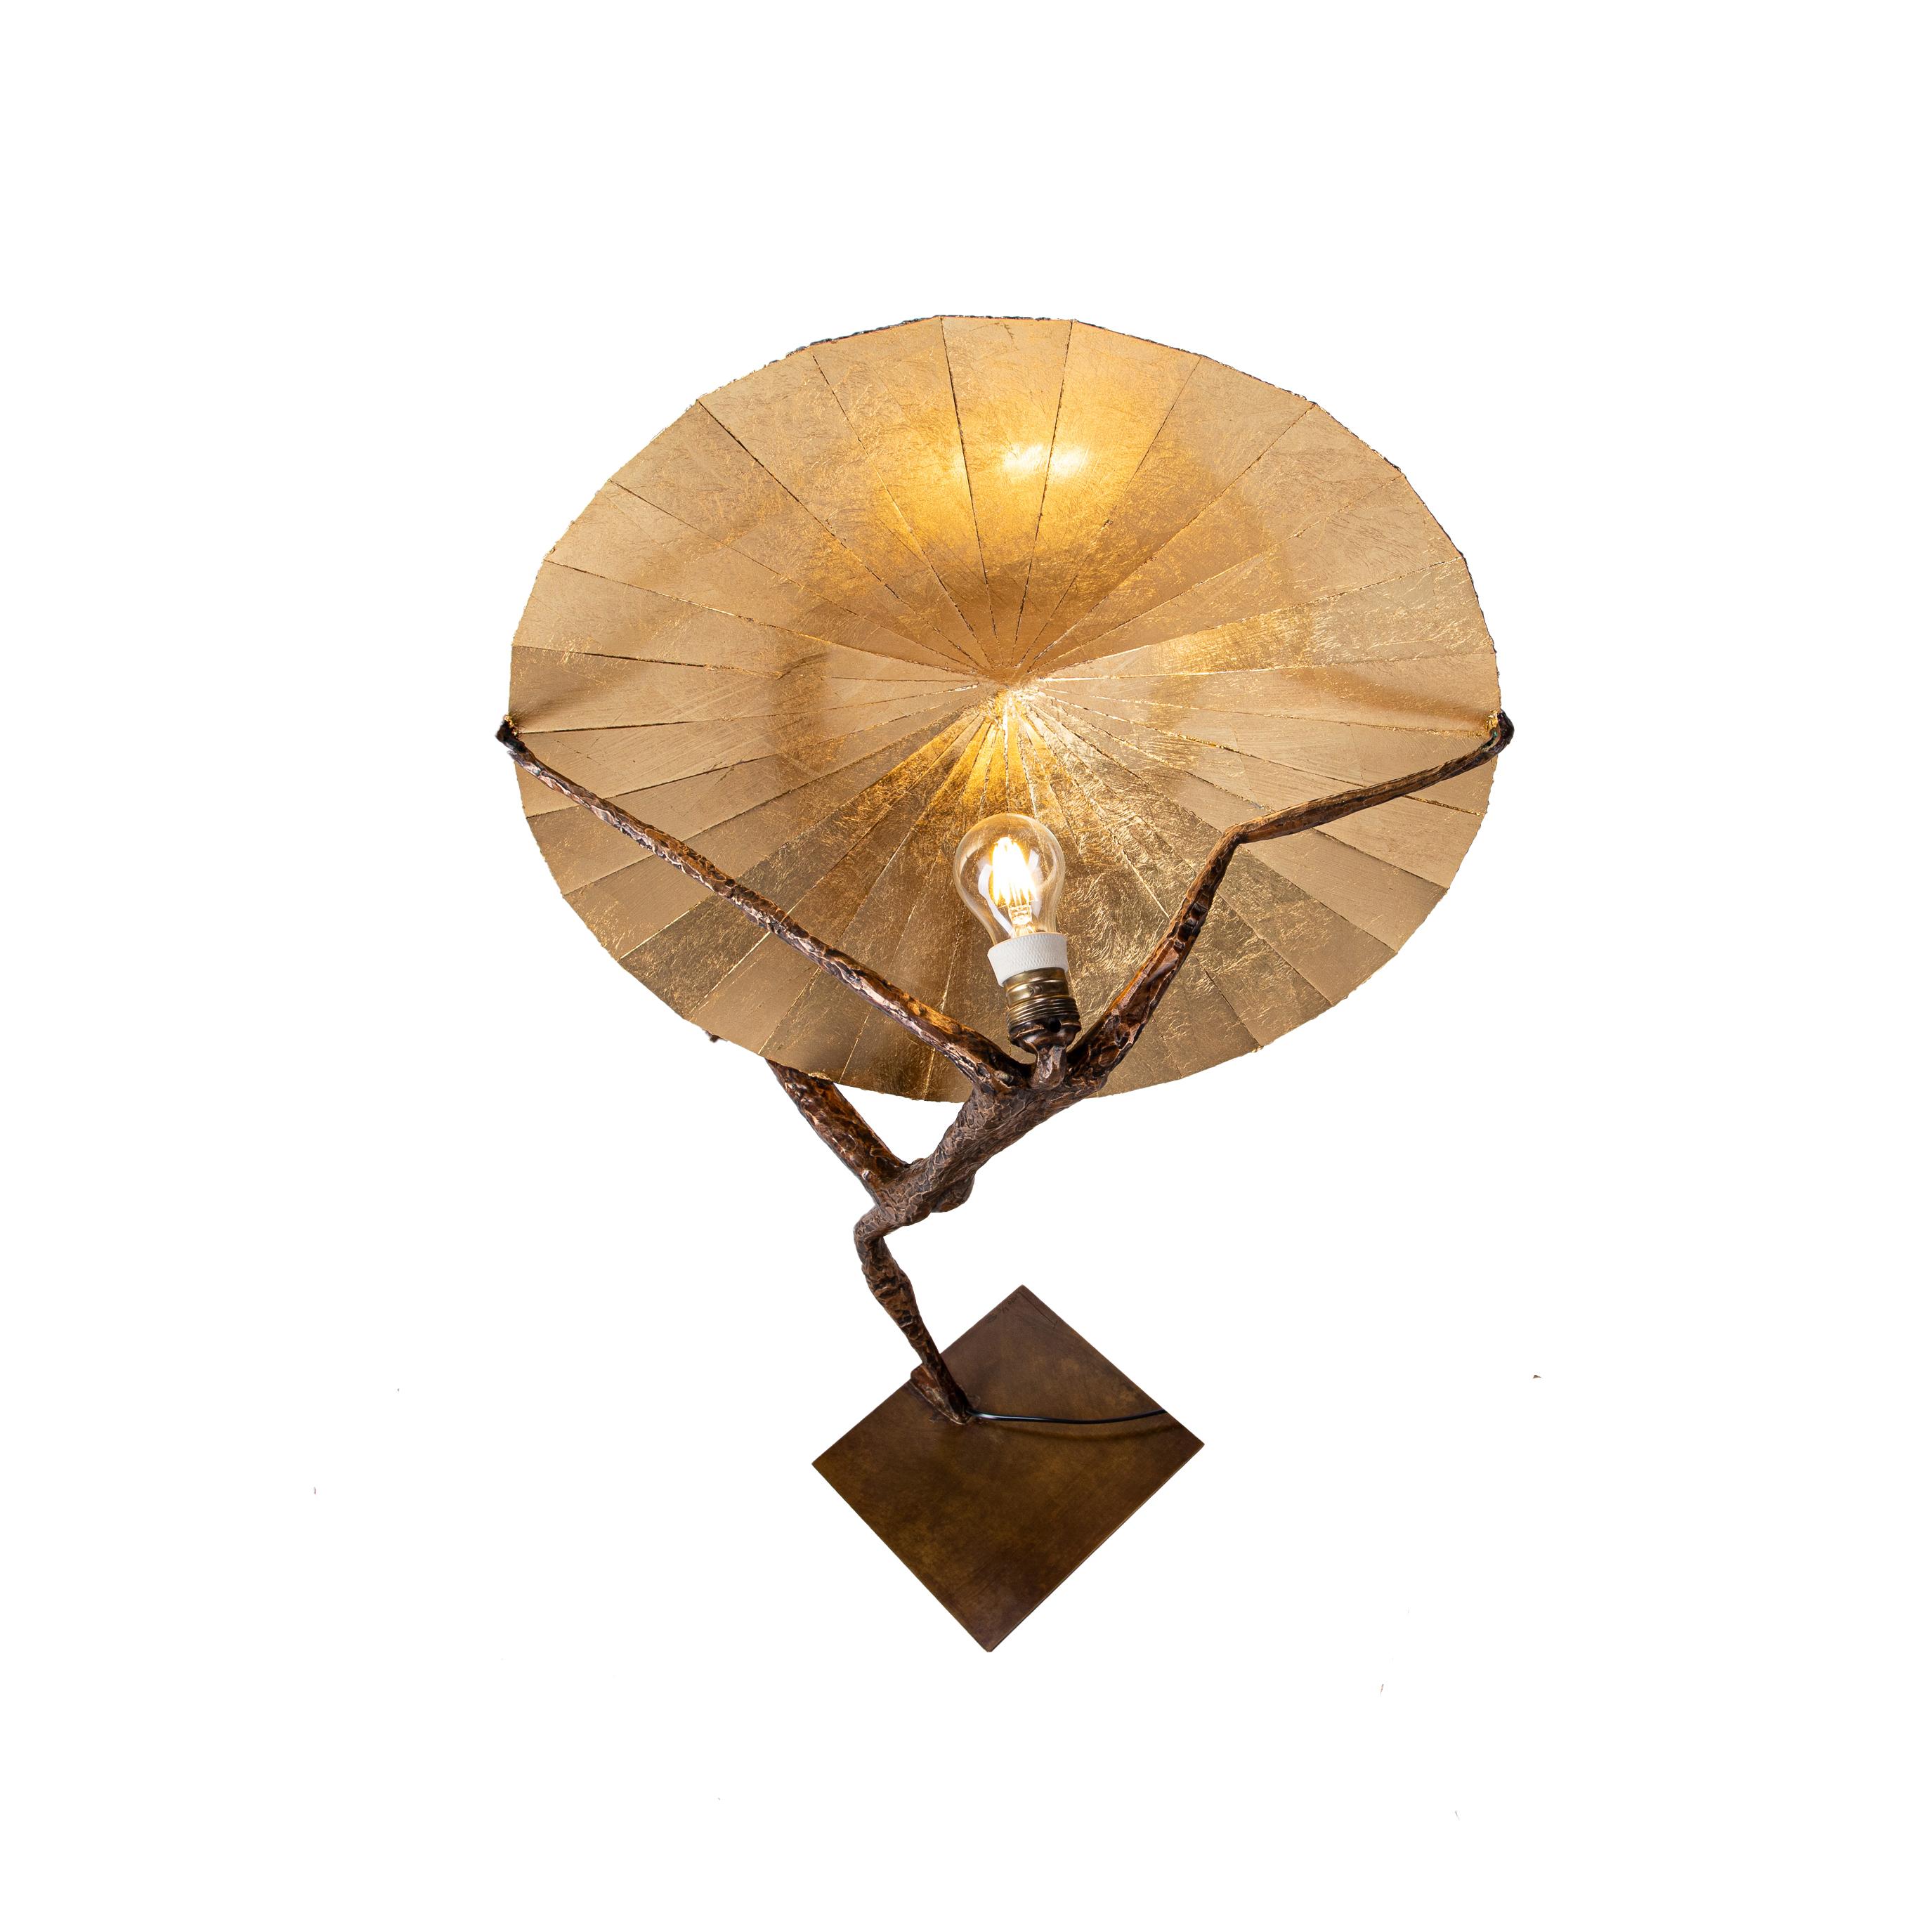 21st century sculpturale table lamp Sisyphe by Fantôme

Patinated bronze 
Imbalanced male character 
Reflector in patinated & gilded brass 
Measures: H. 37.4’’ x 23.6’’
Numbered 2/8, Signed, delivered with a certificate of authenticity.

This